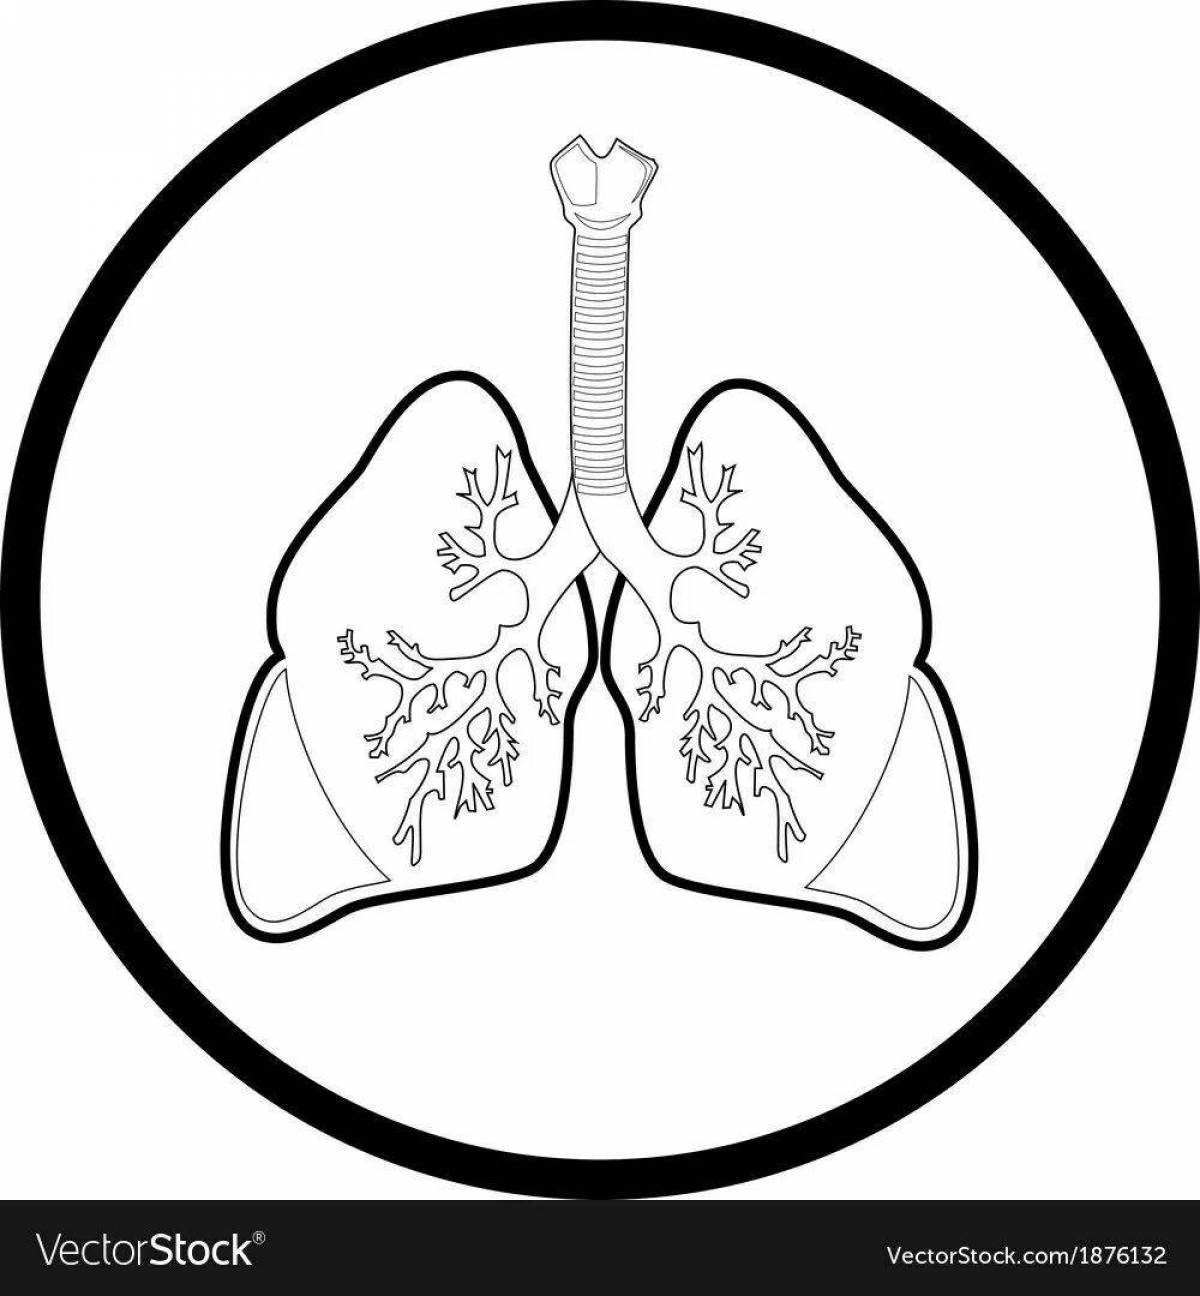 Human lungs for children #7